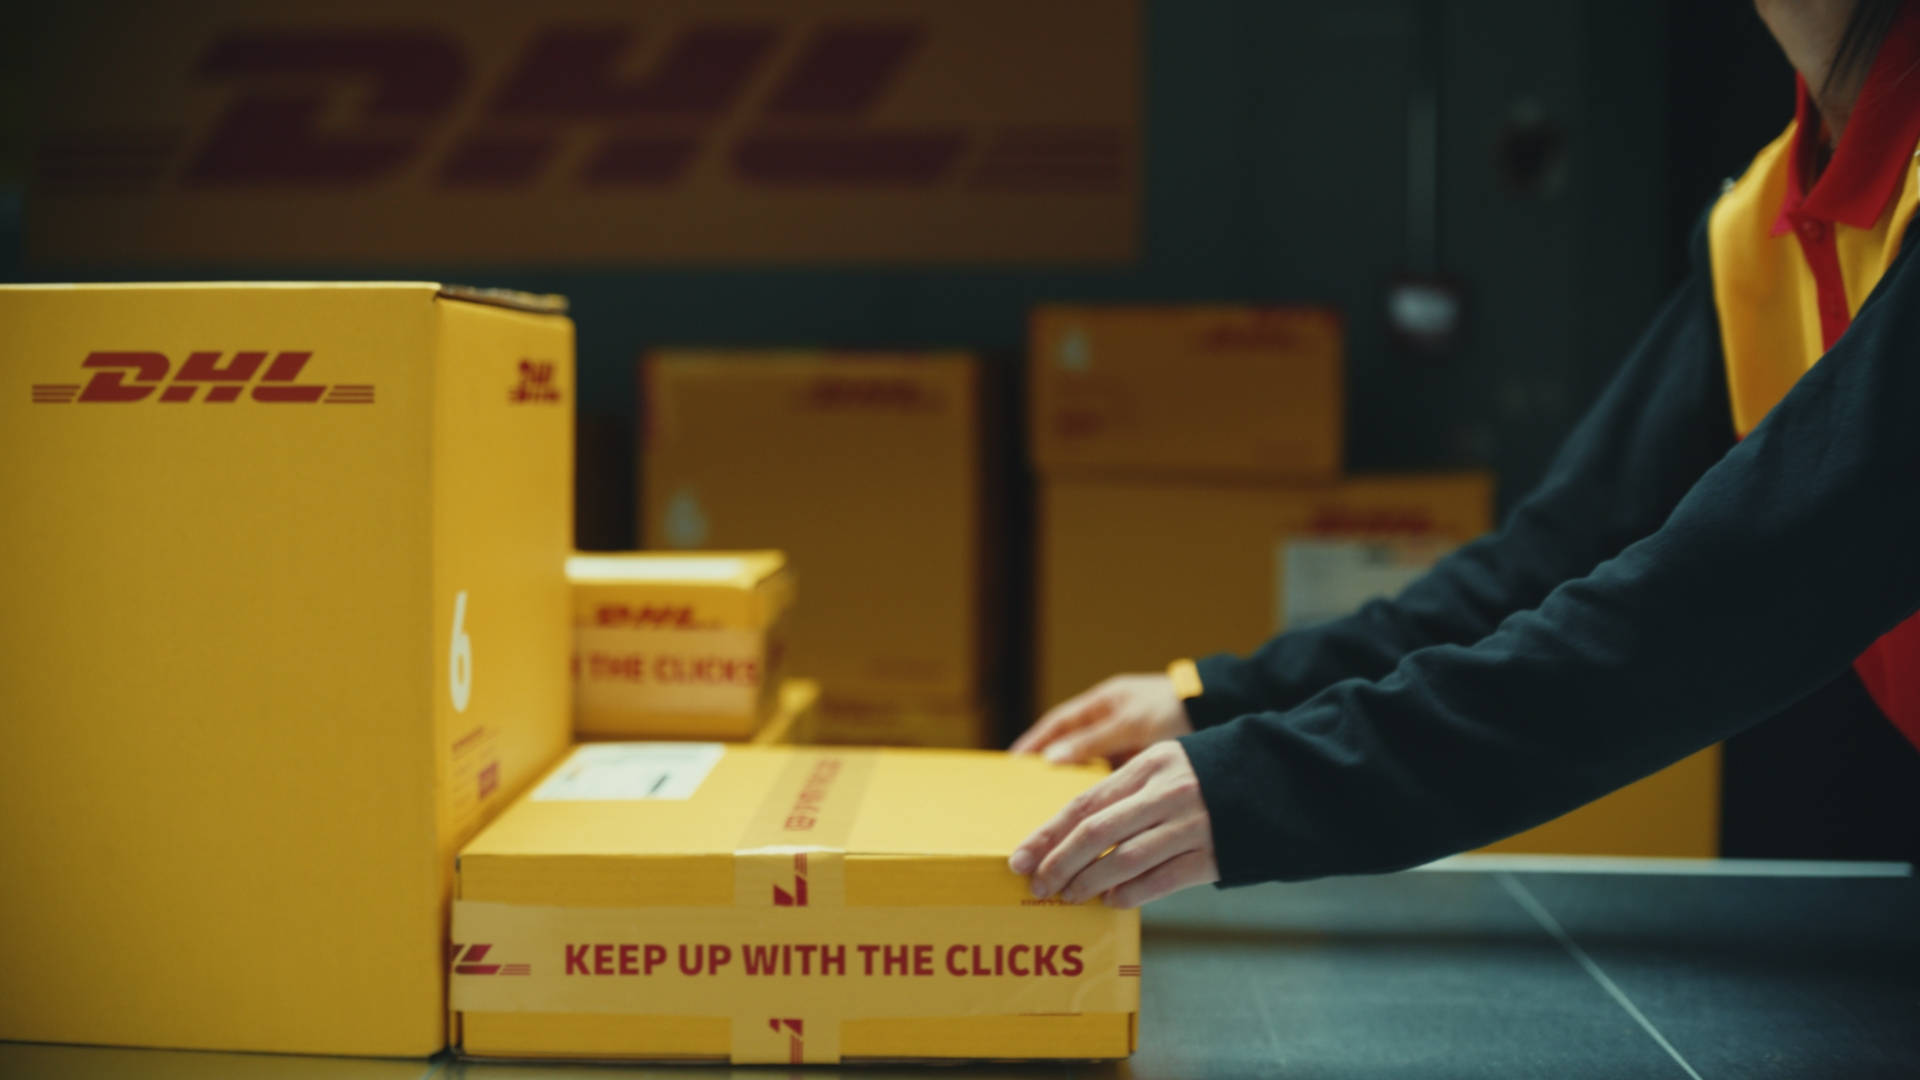 Dhl Shipping Boxes Background